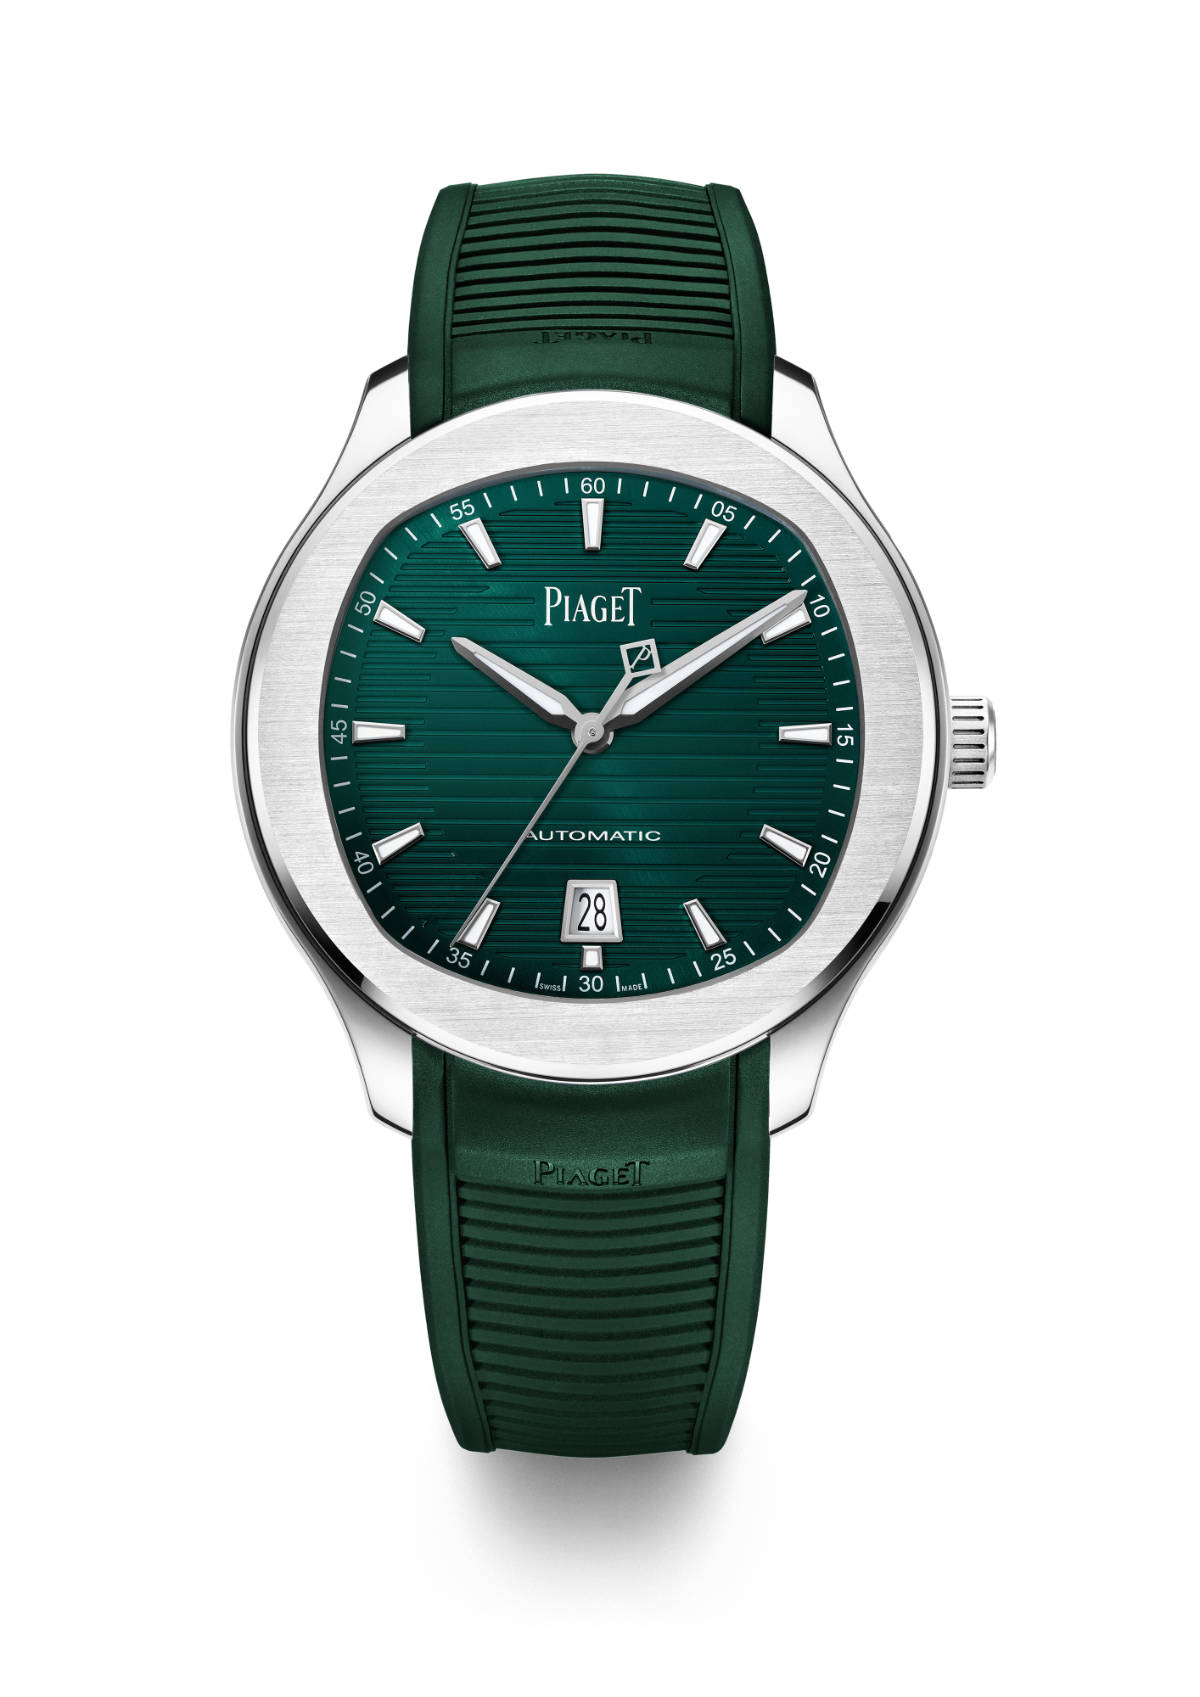 Piaget Presents Its New Polo Field Watch